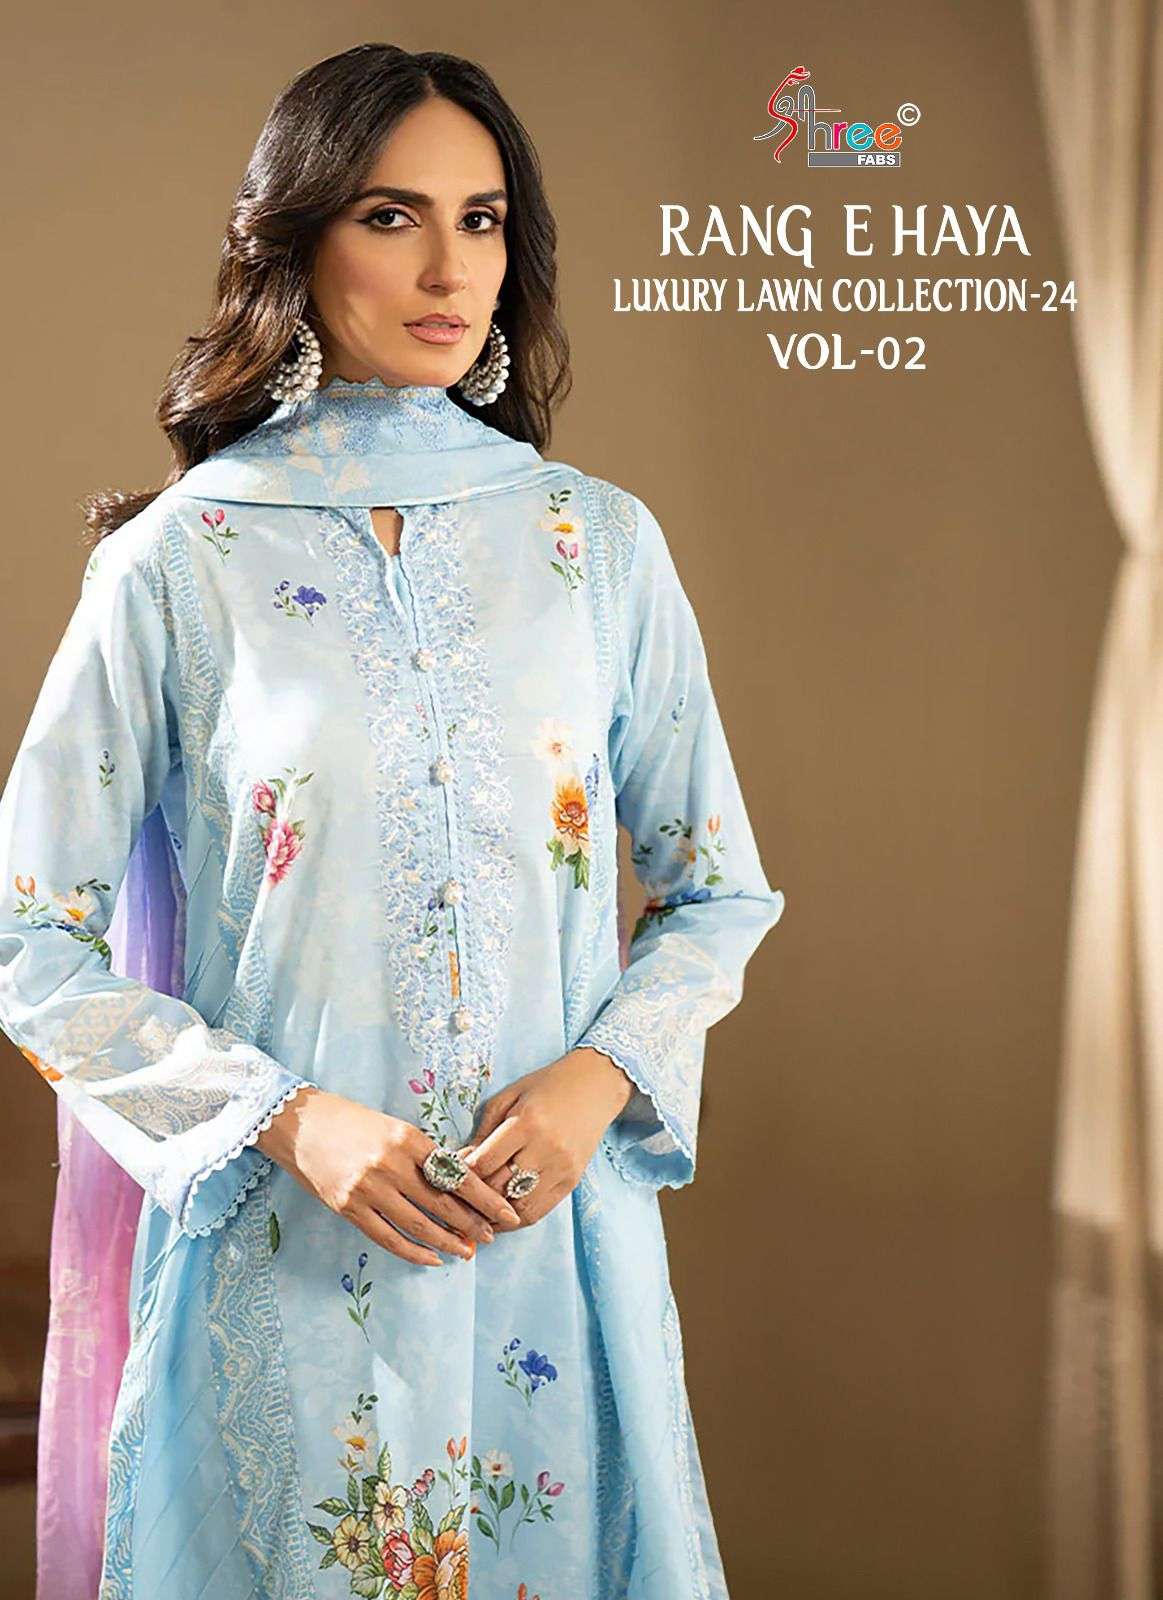 Shree Fabs Rang E Haya Luxury Lawn Collection 24 Vol 2 Cotton Pakistani Suit Suppliers